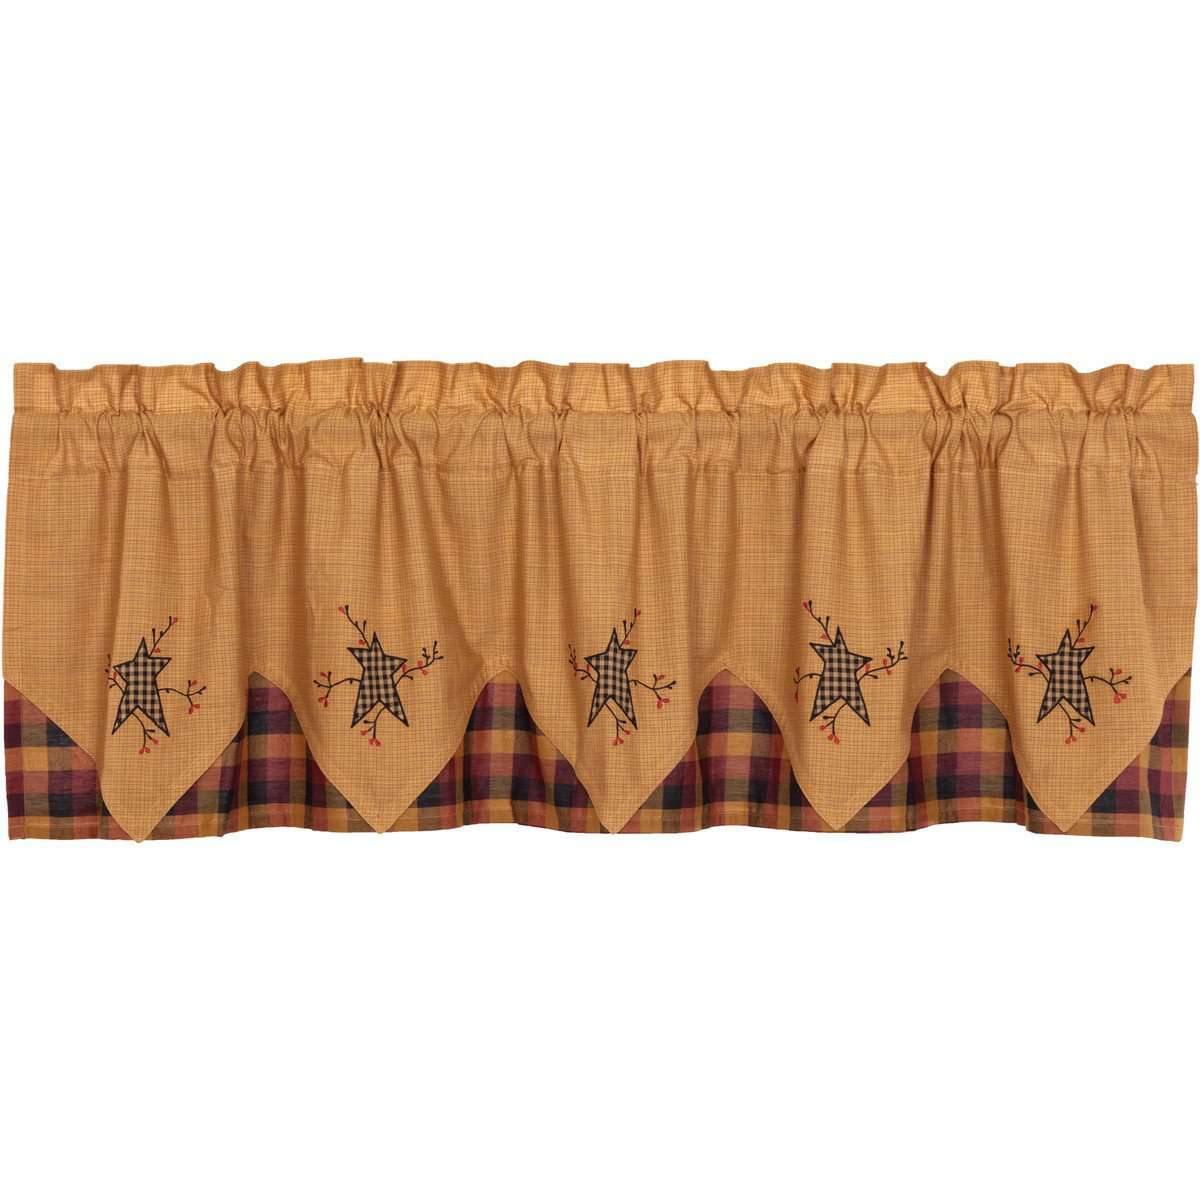 Heritage Farms Primitive Star and Pip Valance Layered Curtain 20x72 VHC Brands - The Fox Decor